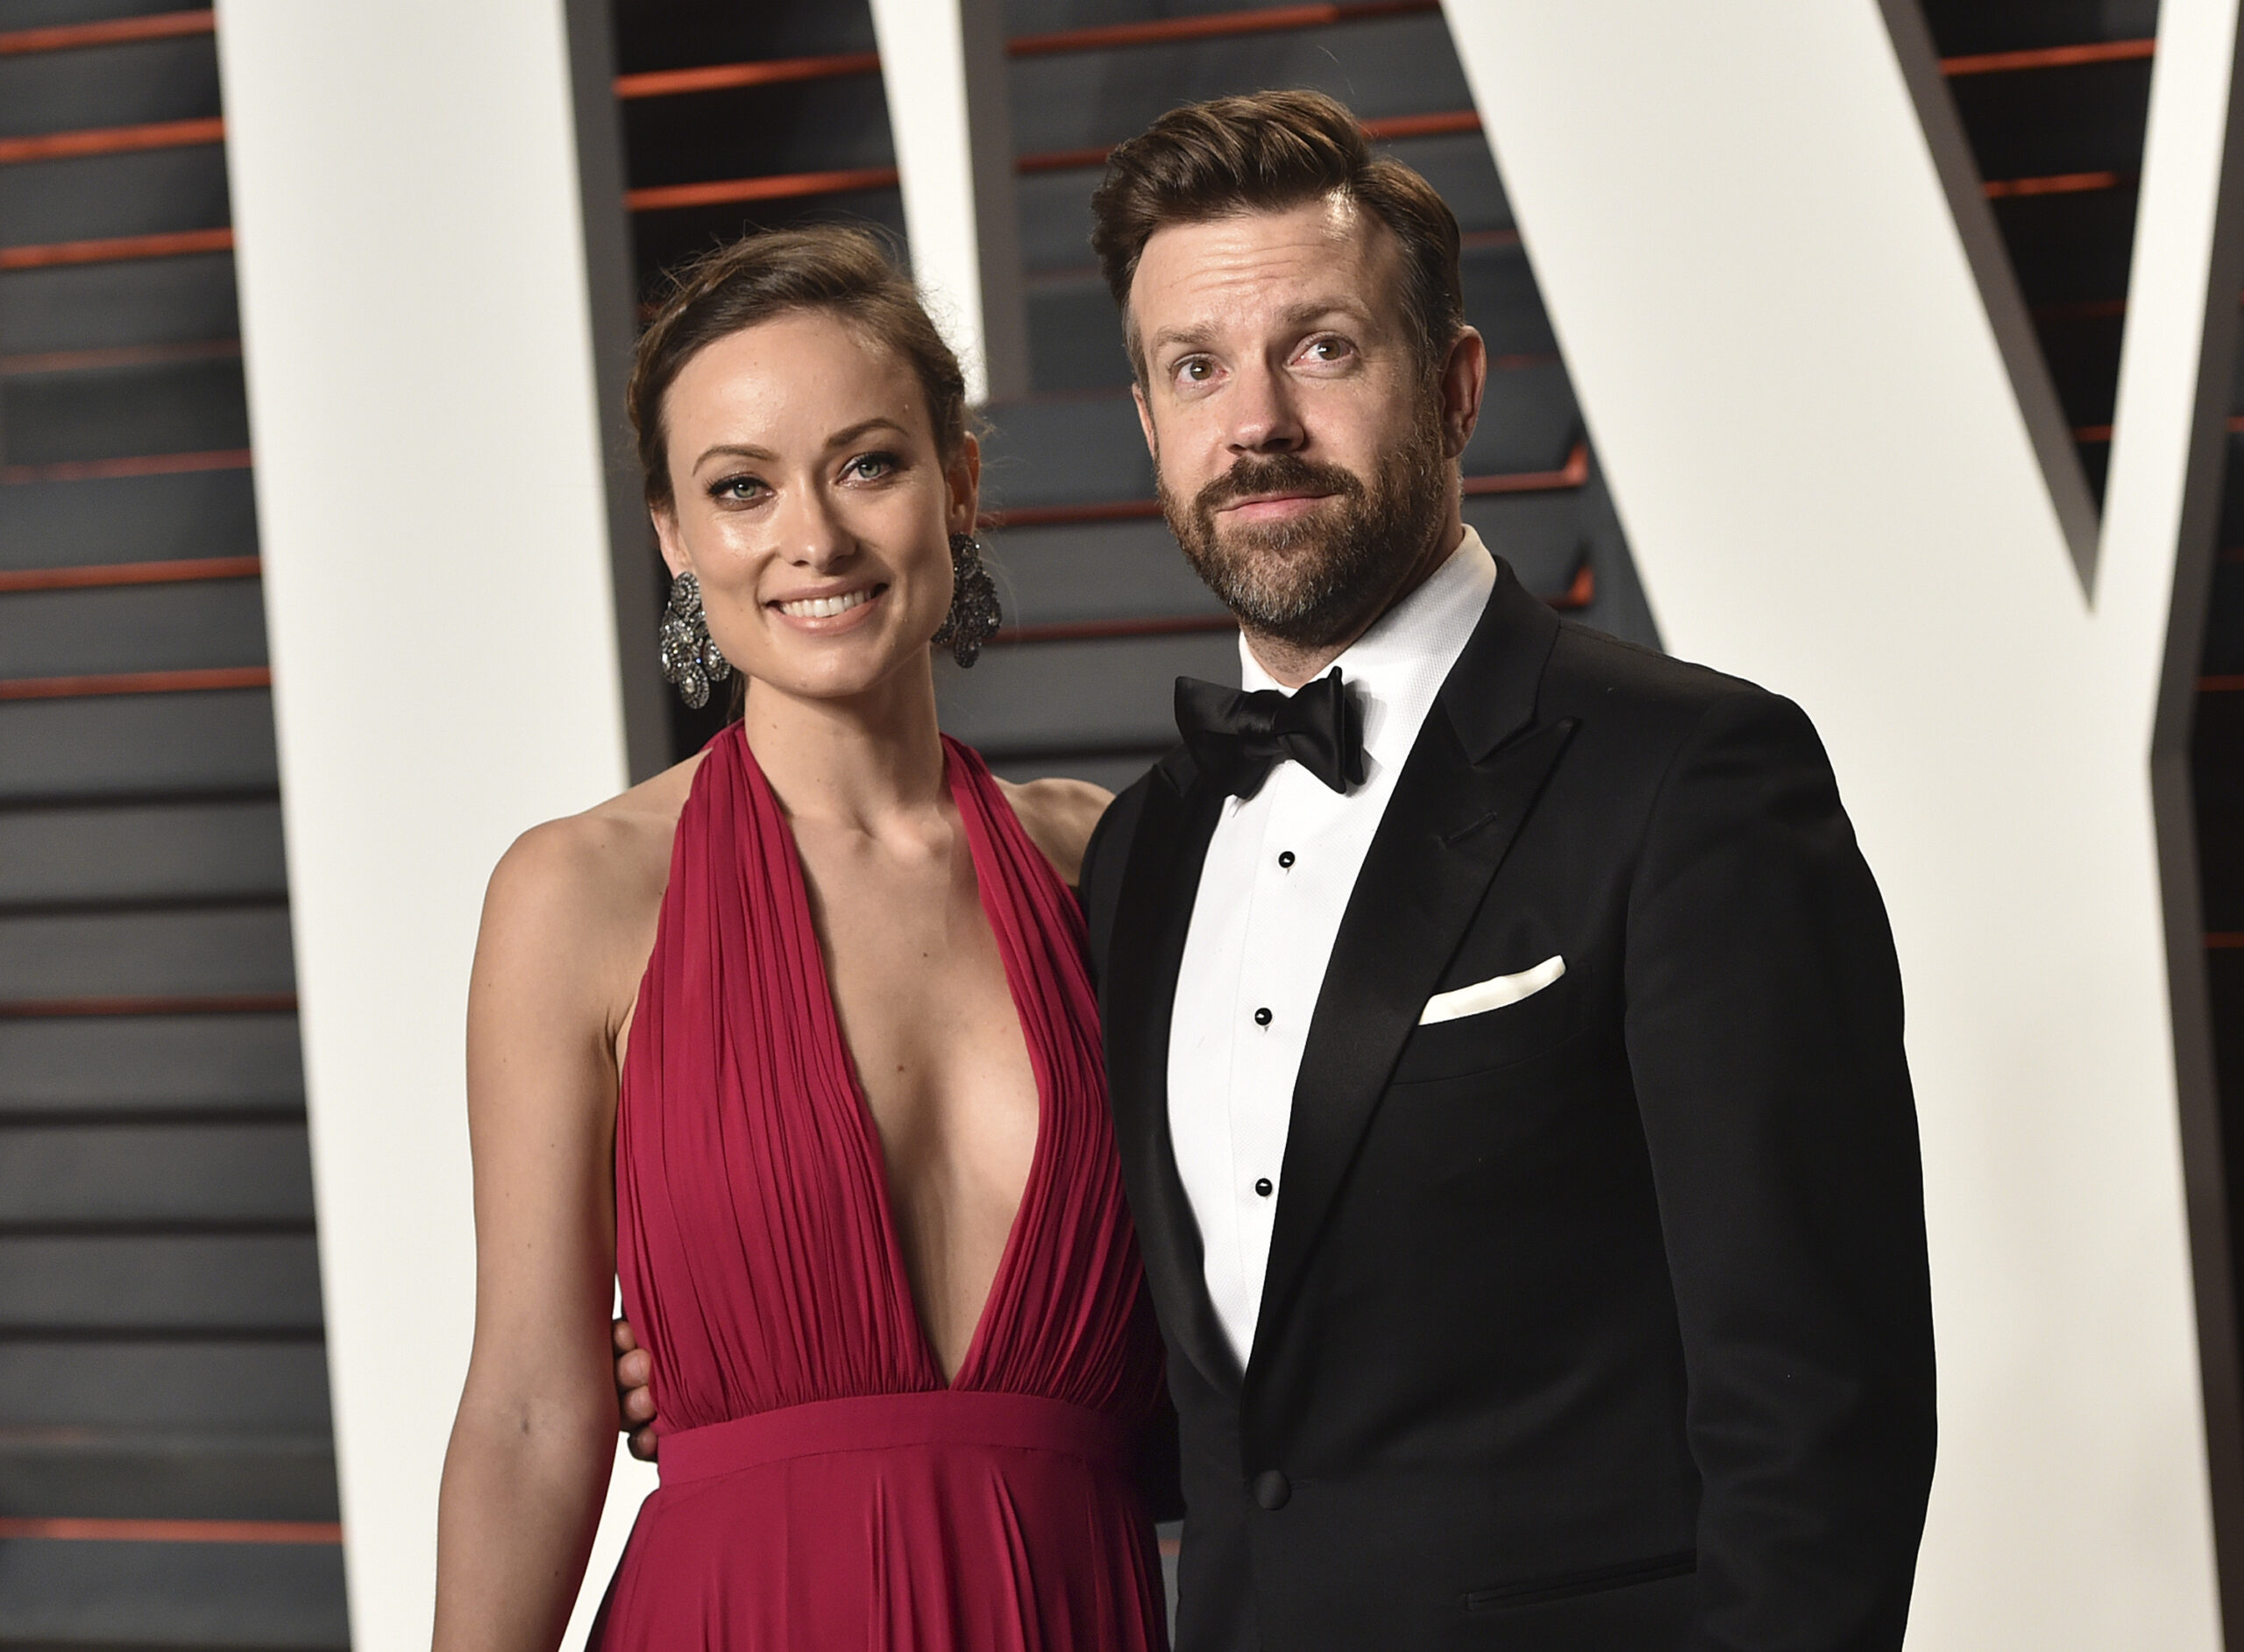 Olivia-Wilde-is-fit-and-fabulous-while-heading-out-with-Jason-Sudeikis-5